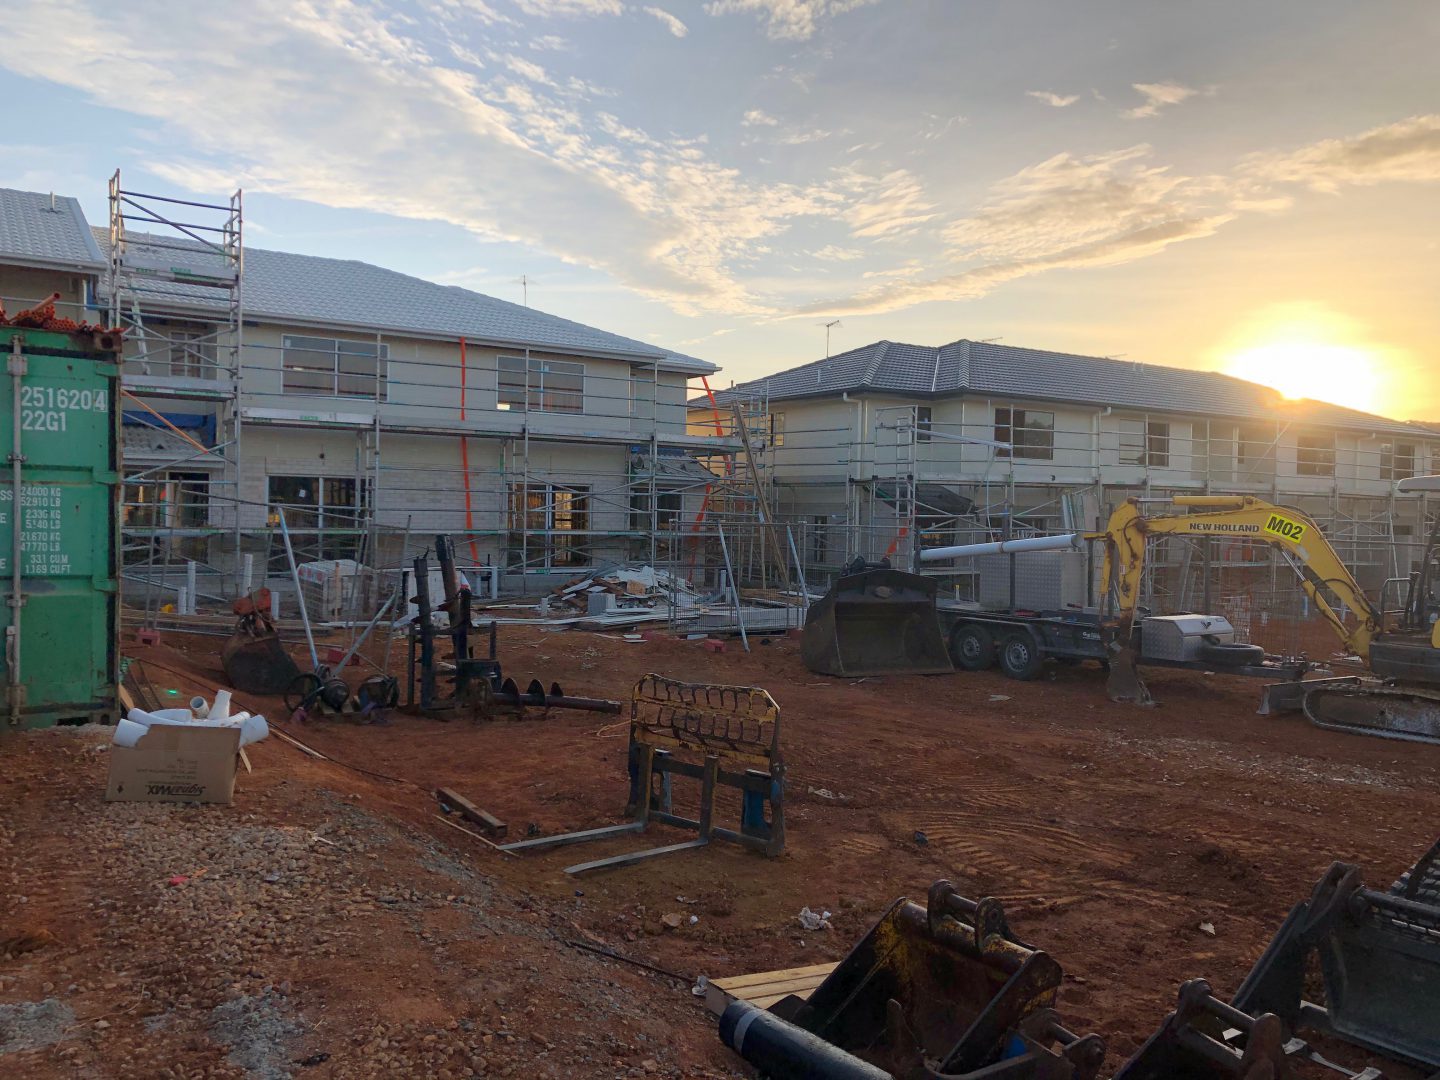 Linx Residences Construction Update April 2020 (image supplied by AR Developments)3